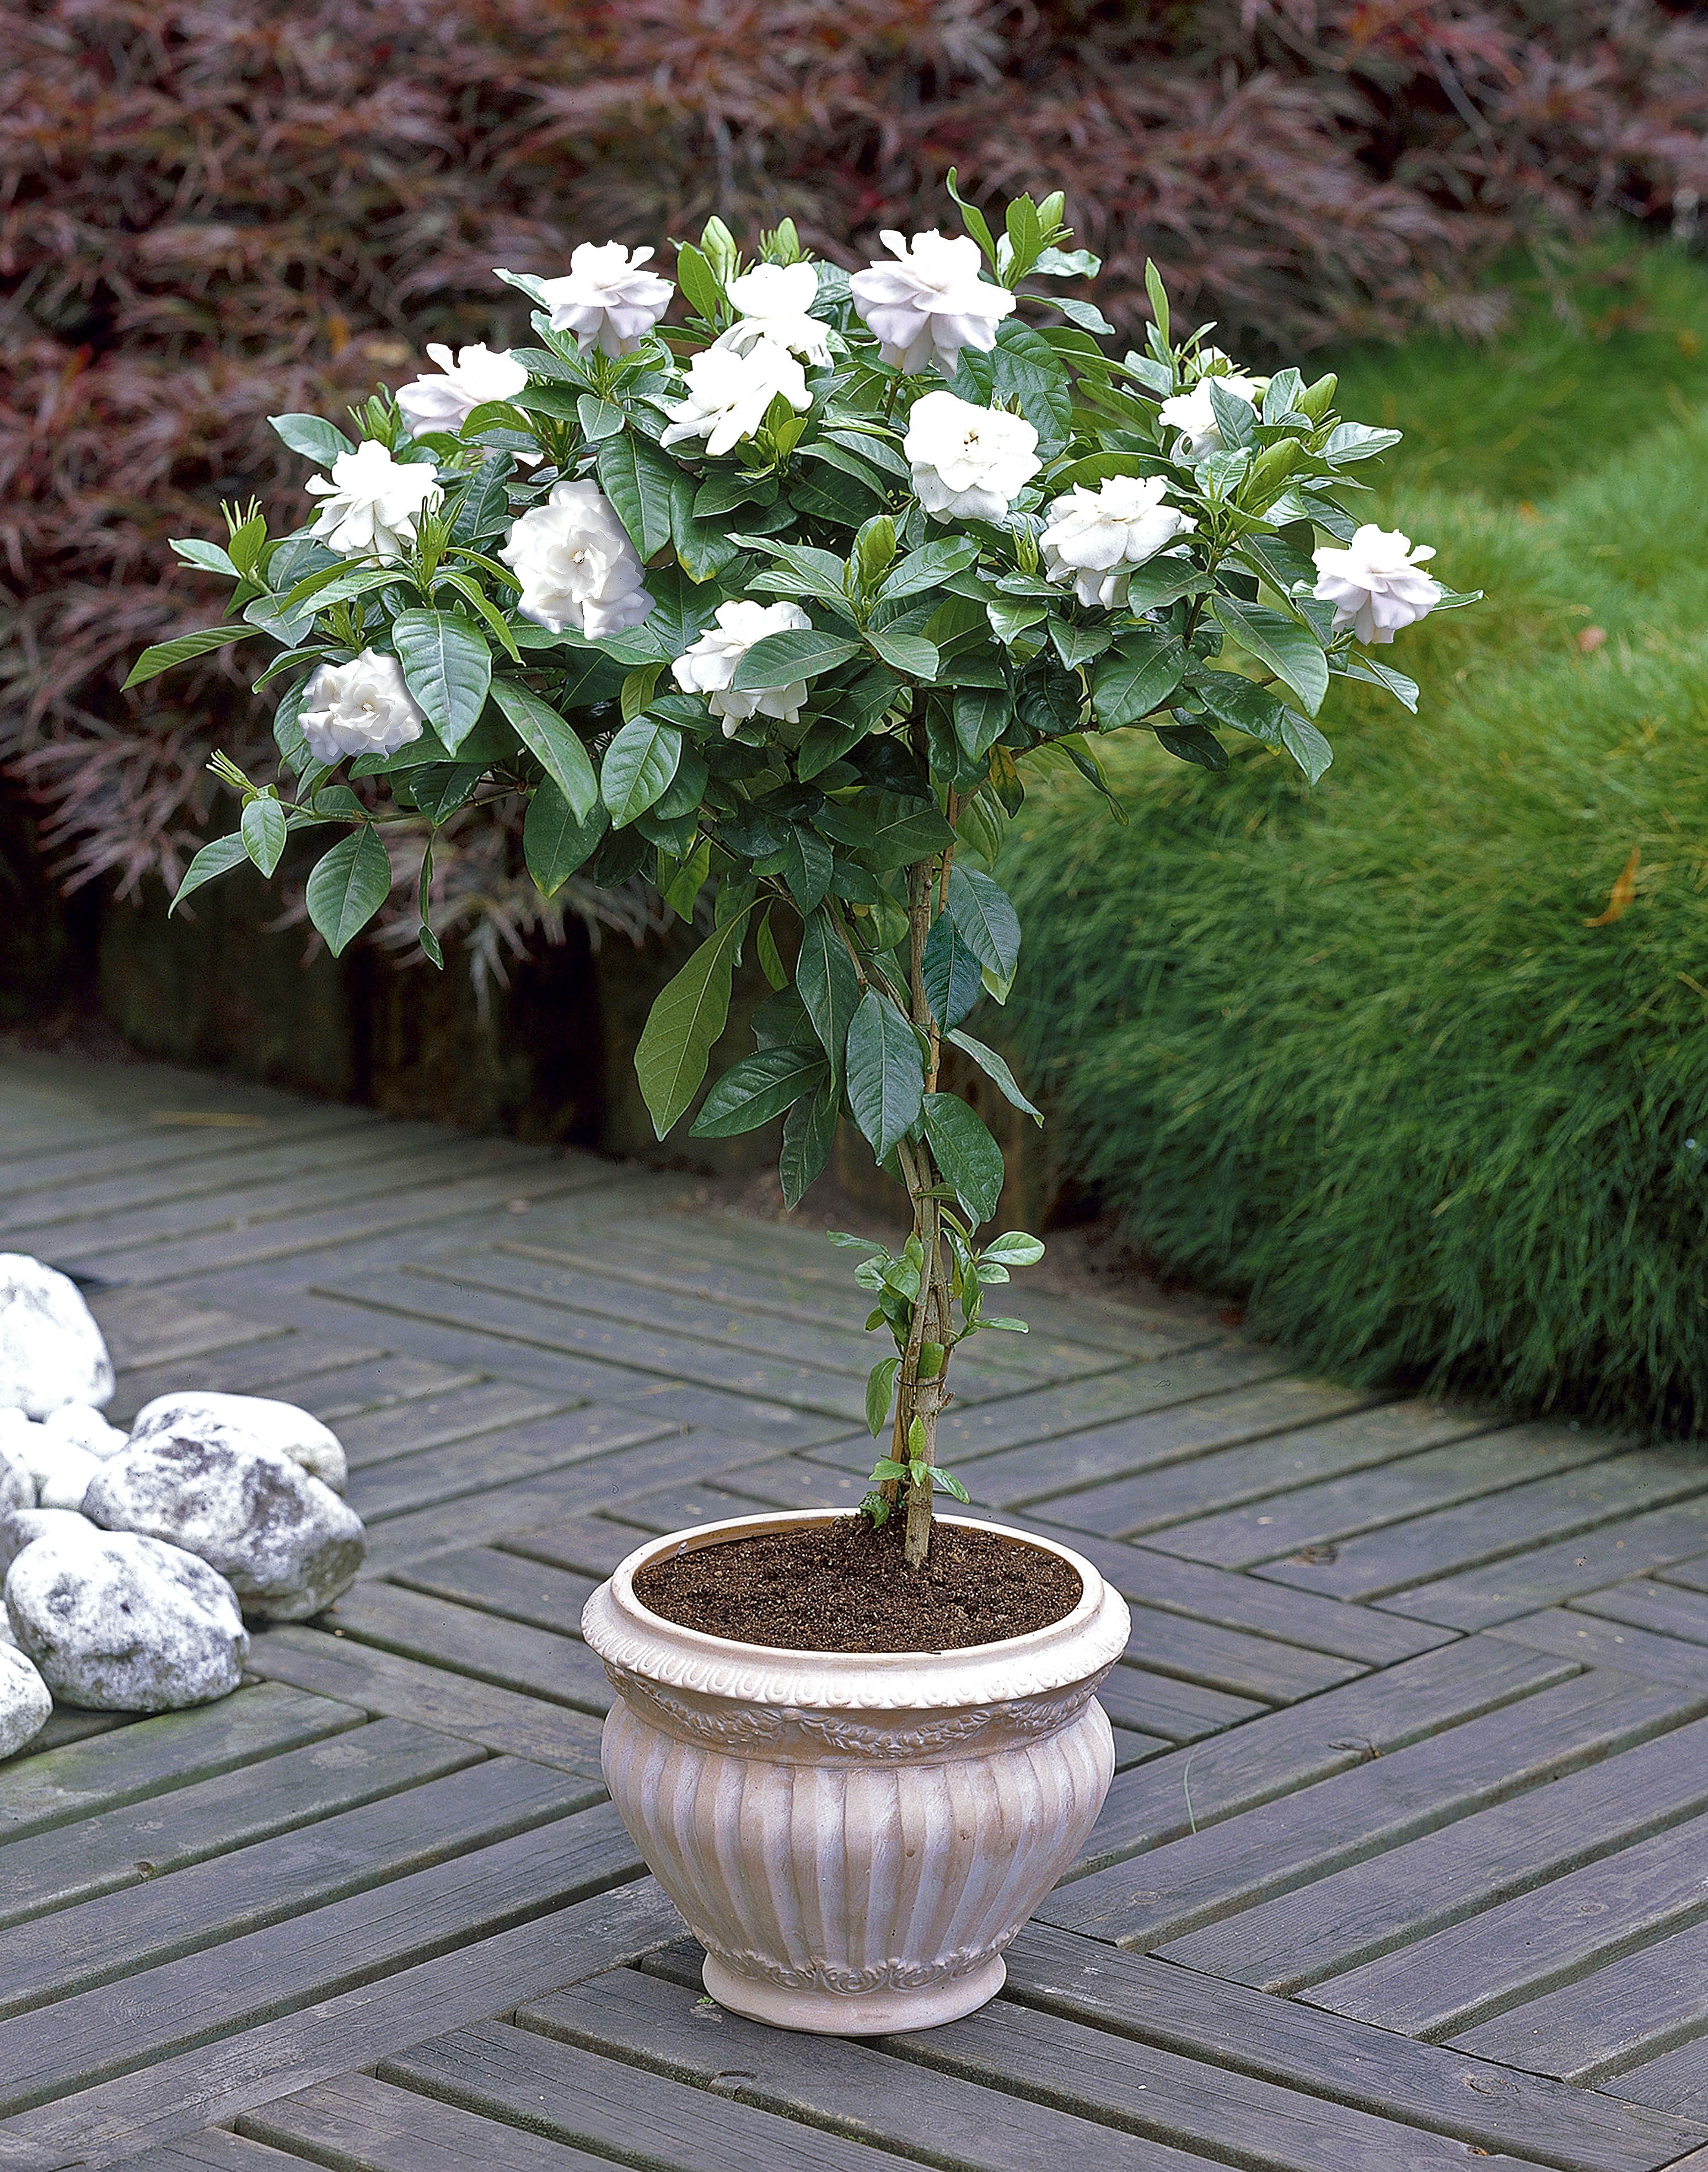 These Gardenia Trees are a great addition to any patio- they fill up your yard with a sweet fragrance, but require minimal maintenance!